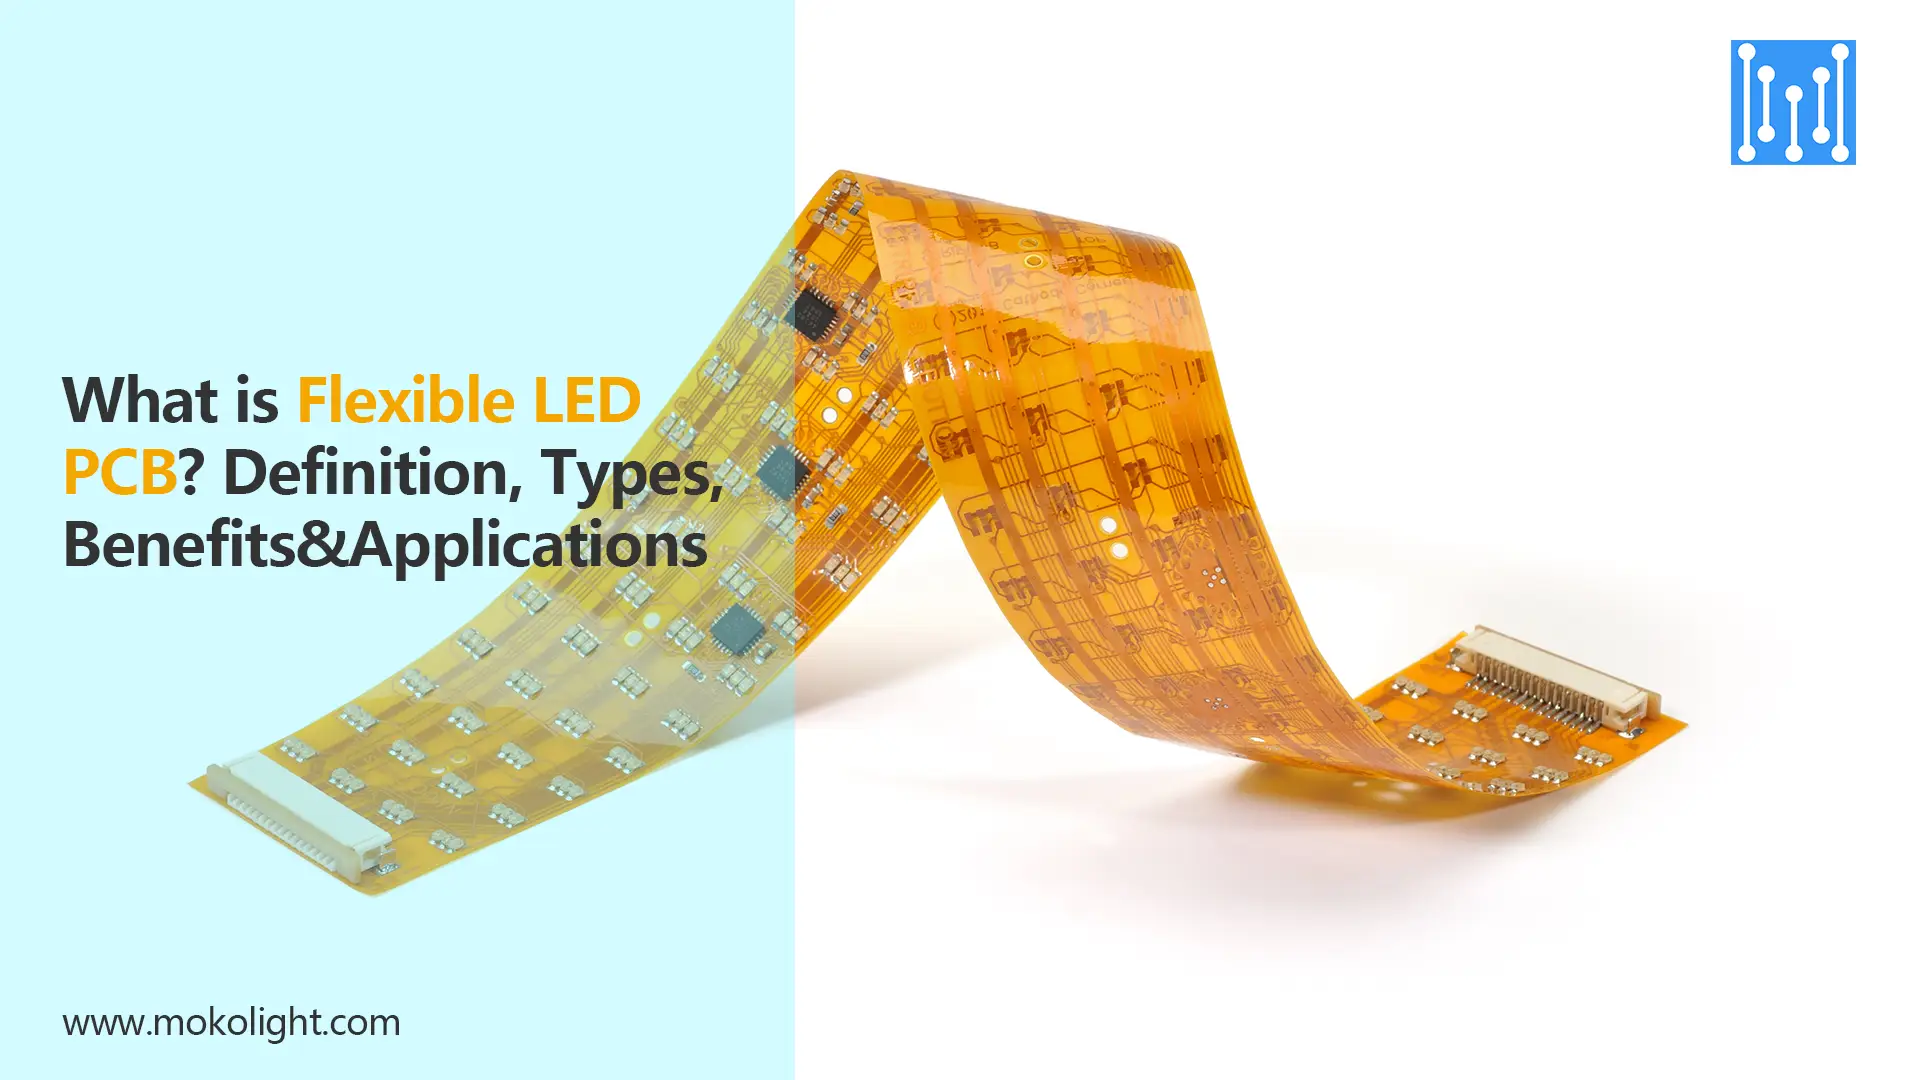 What is Flexible LED PCB Definition, Types, Benefits&Applications